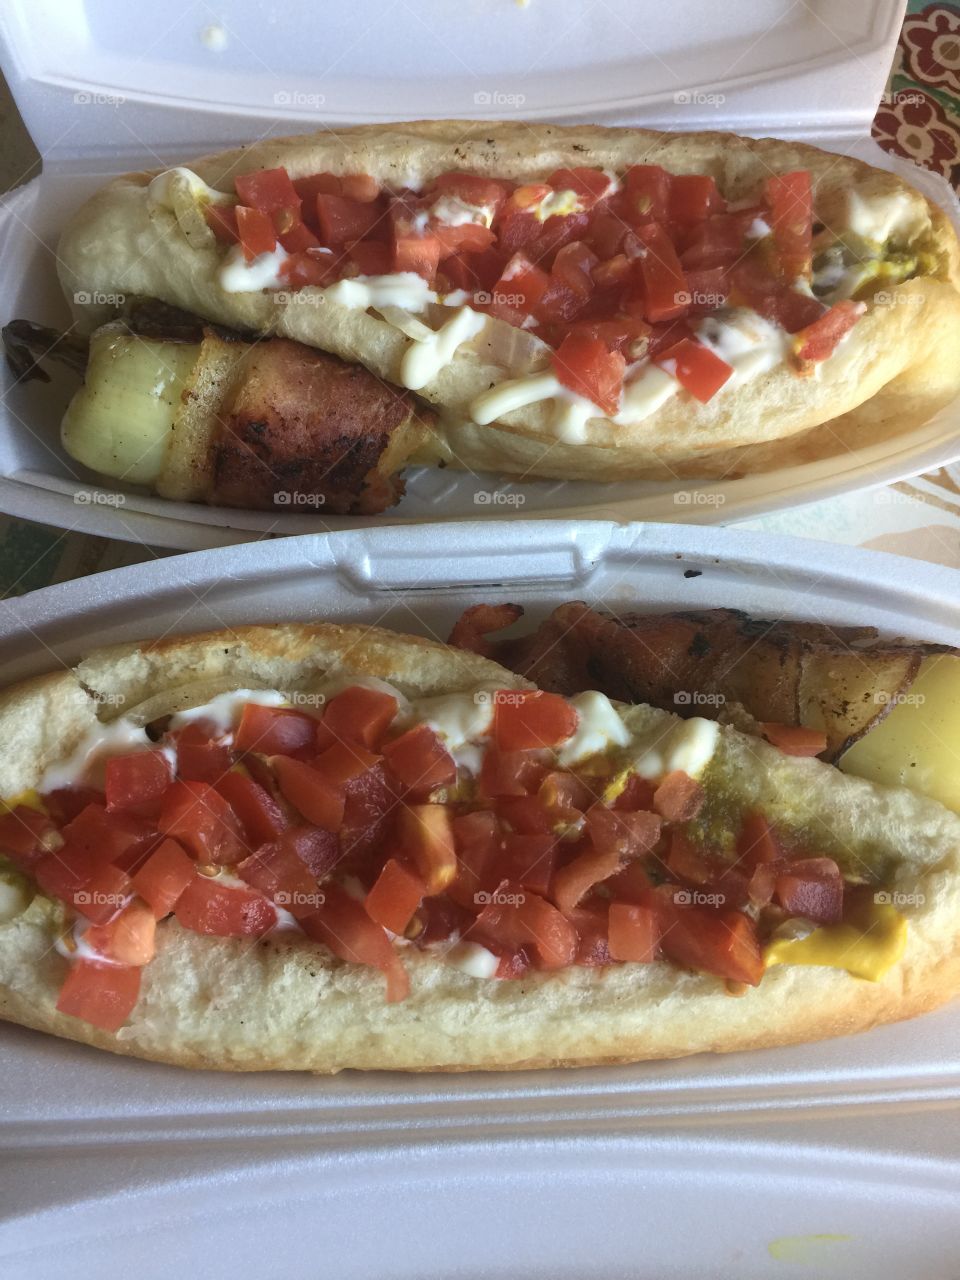 Sonoran style hot dogs